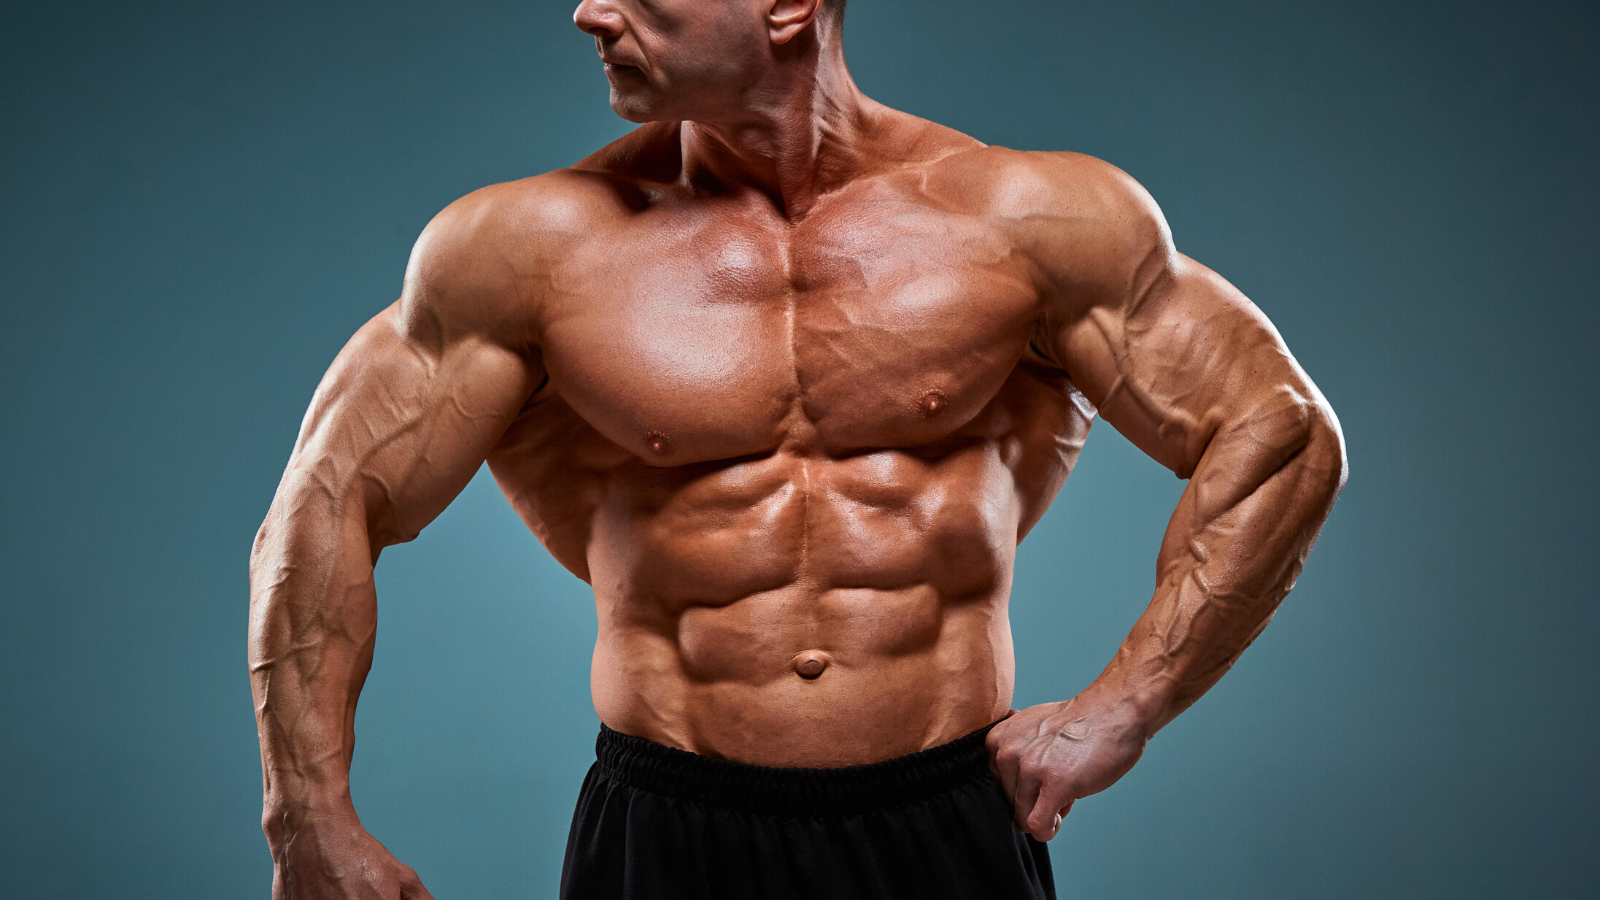 22 Best Pectoralis Muscle Exercises for a Bigger, Stronger Chest